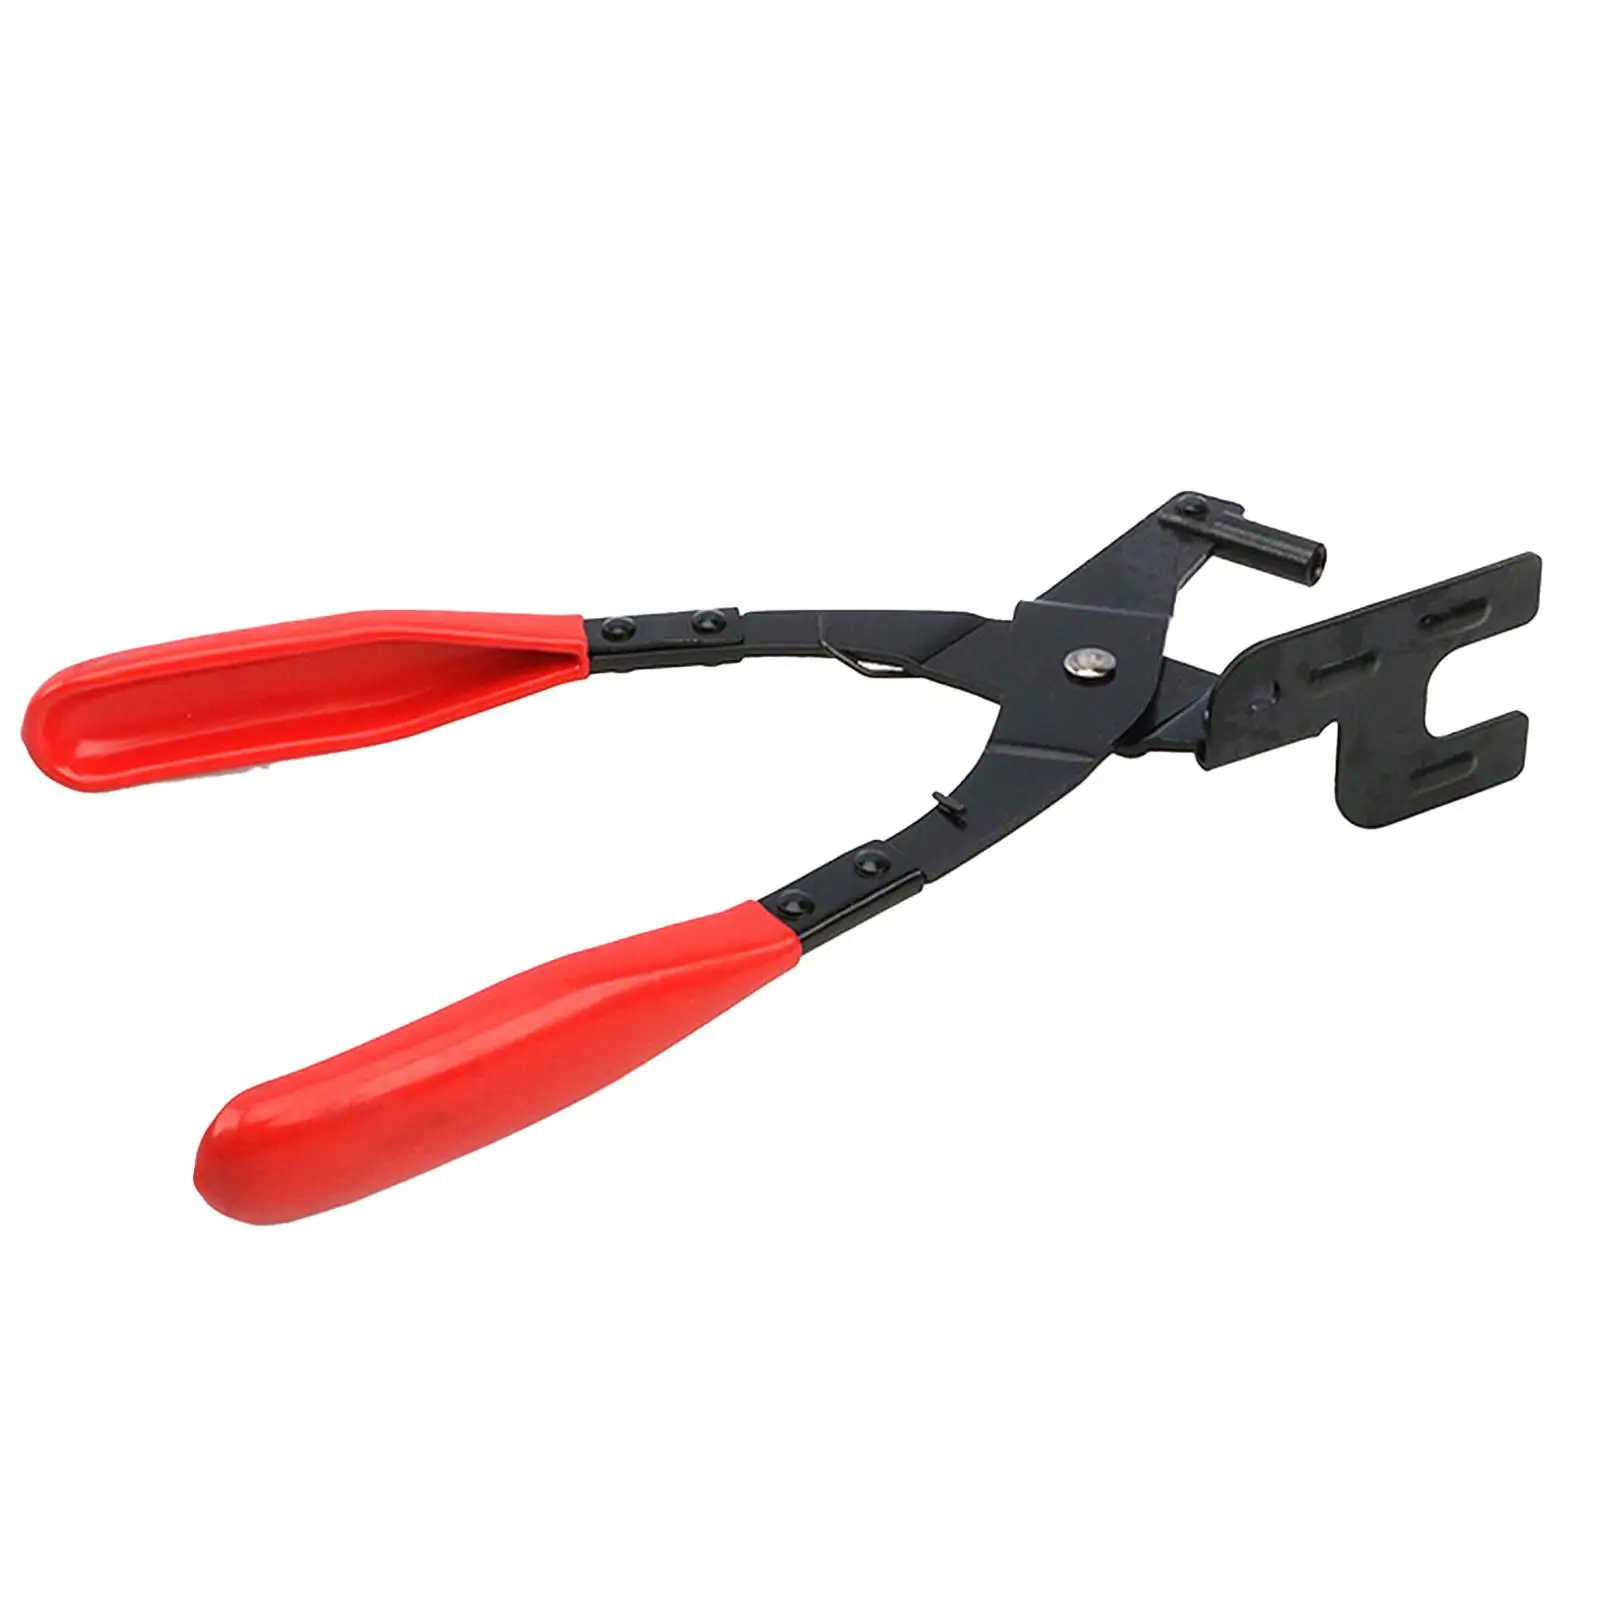 Exhaust Hanger Removal Pliers Hand Tools Anti Slip Muffler Hanger Removal Tool Red Compatible with All Exhaust Rubber Hangers